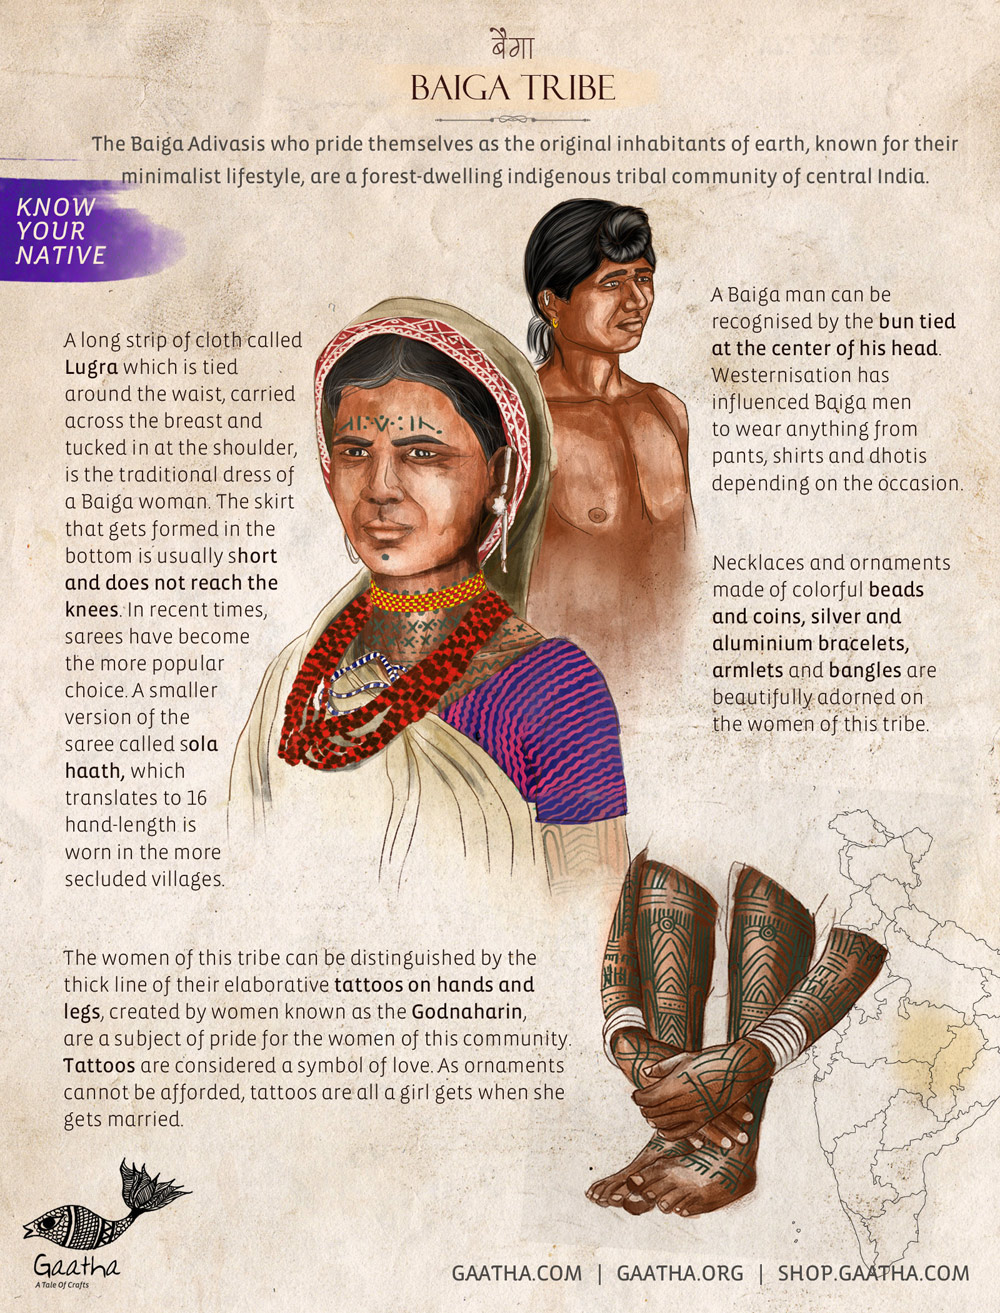 Know Your Native | Unique characteristics of Indian Tribal communities